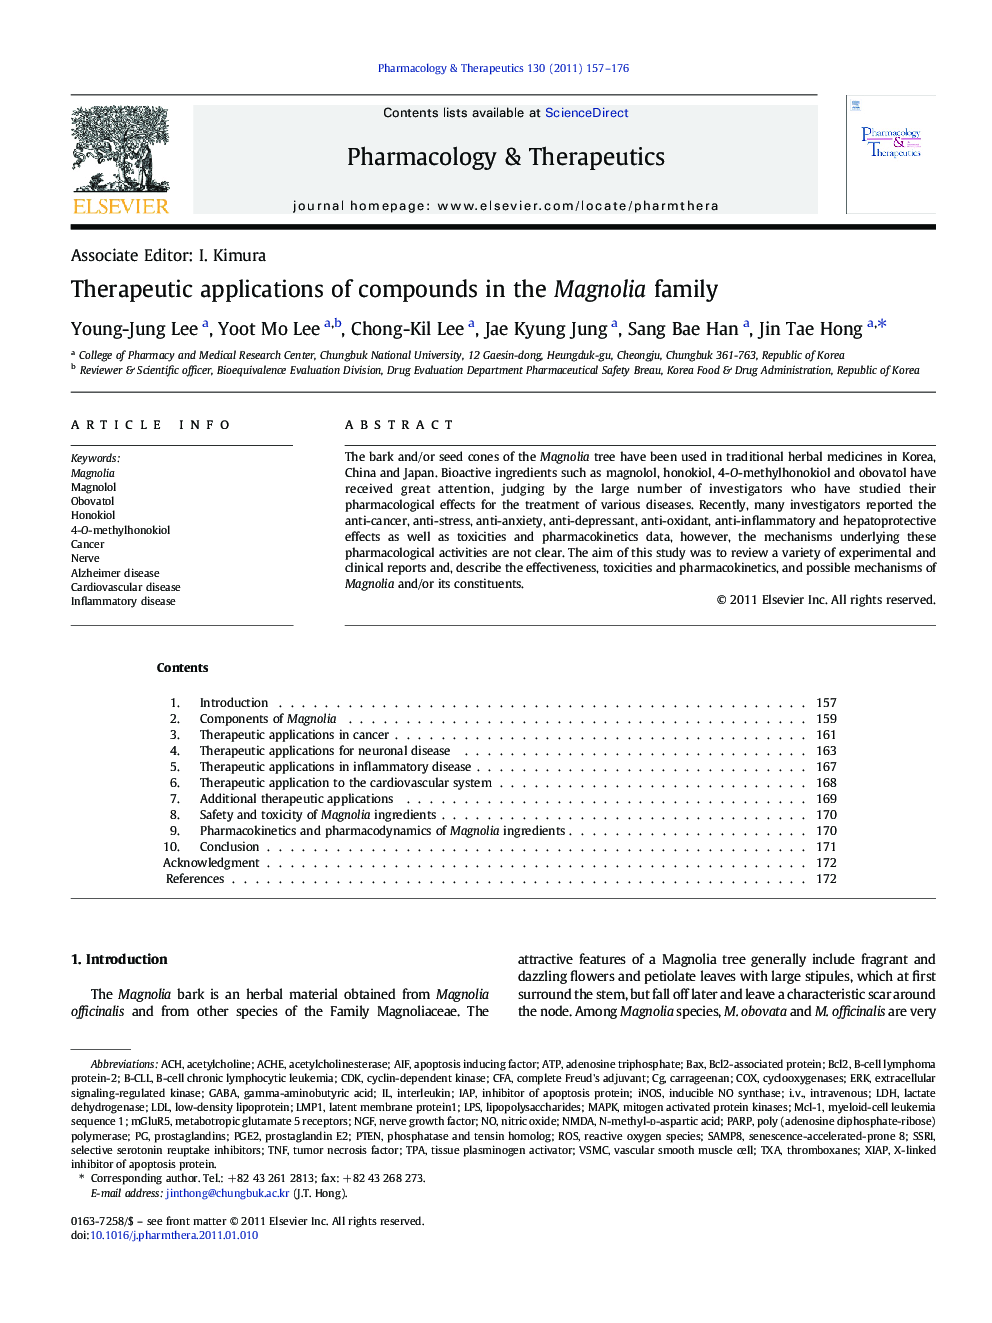 Therapeutic applications of compounds in the Magnolia family